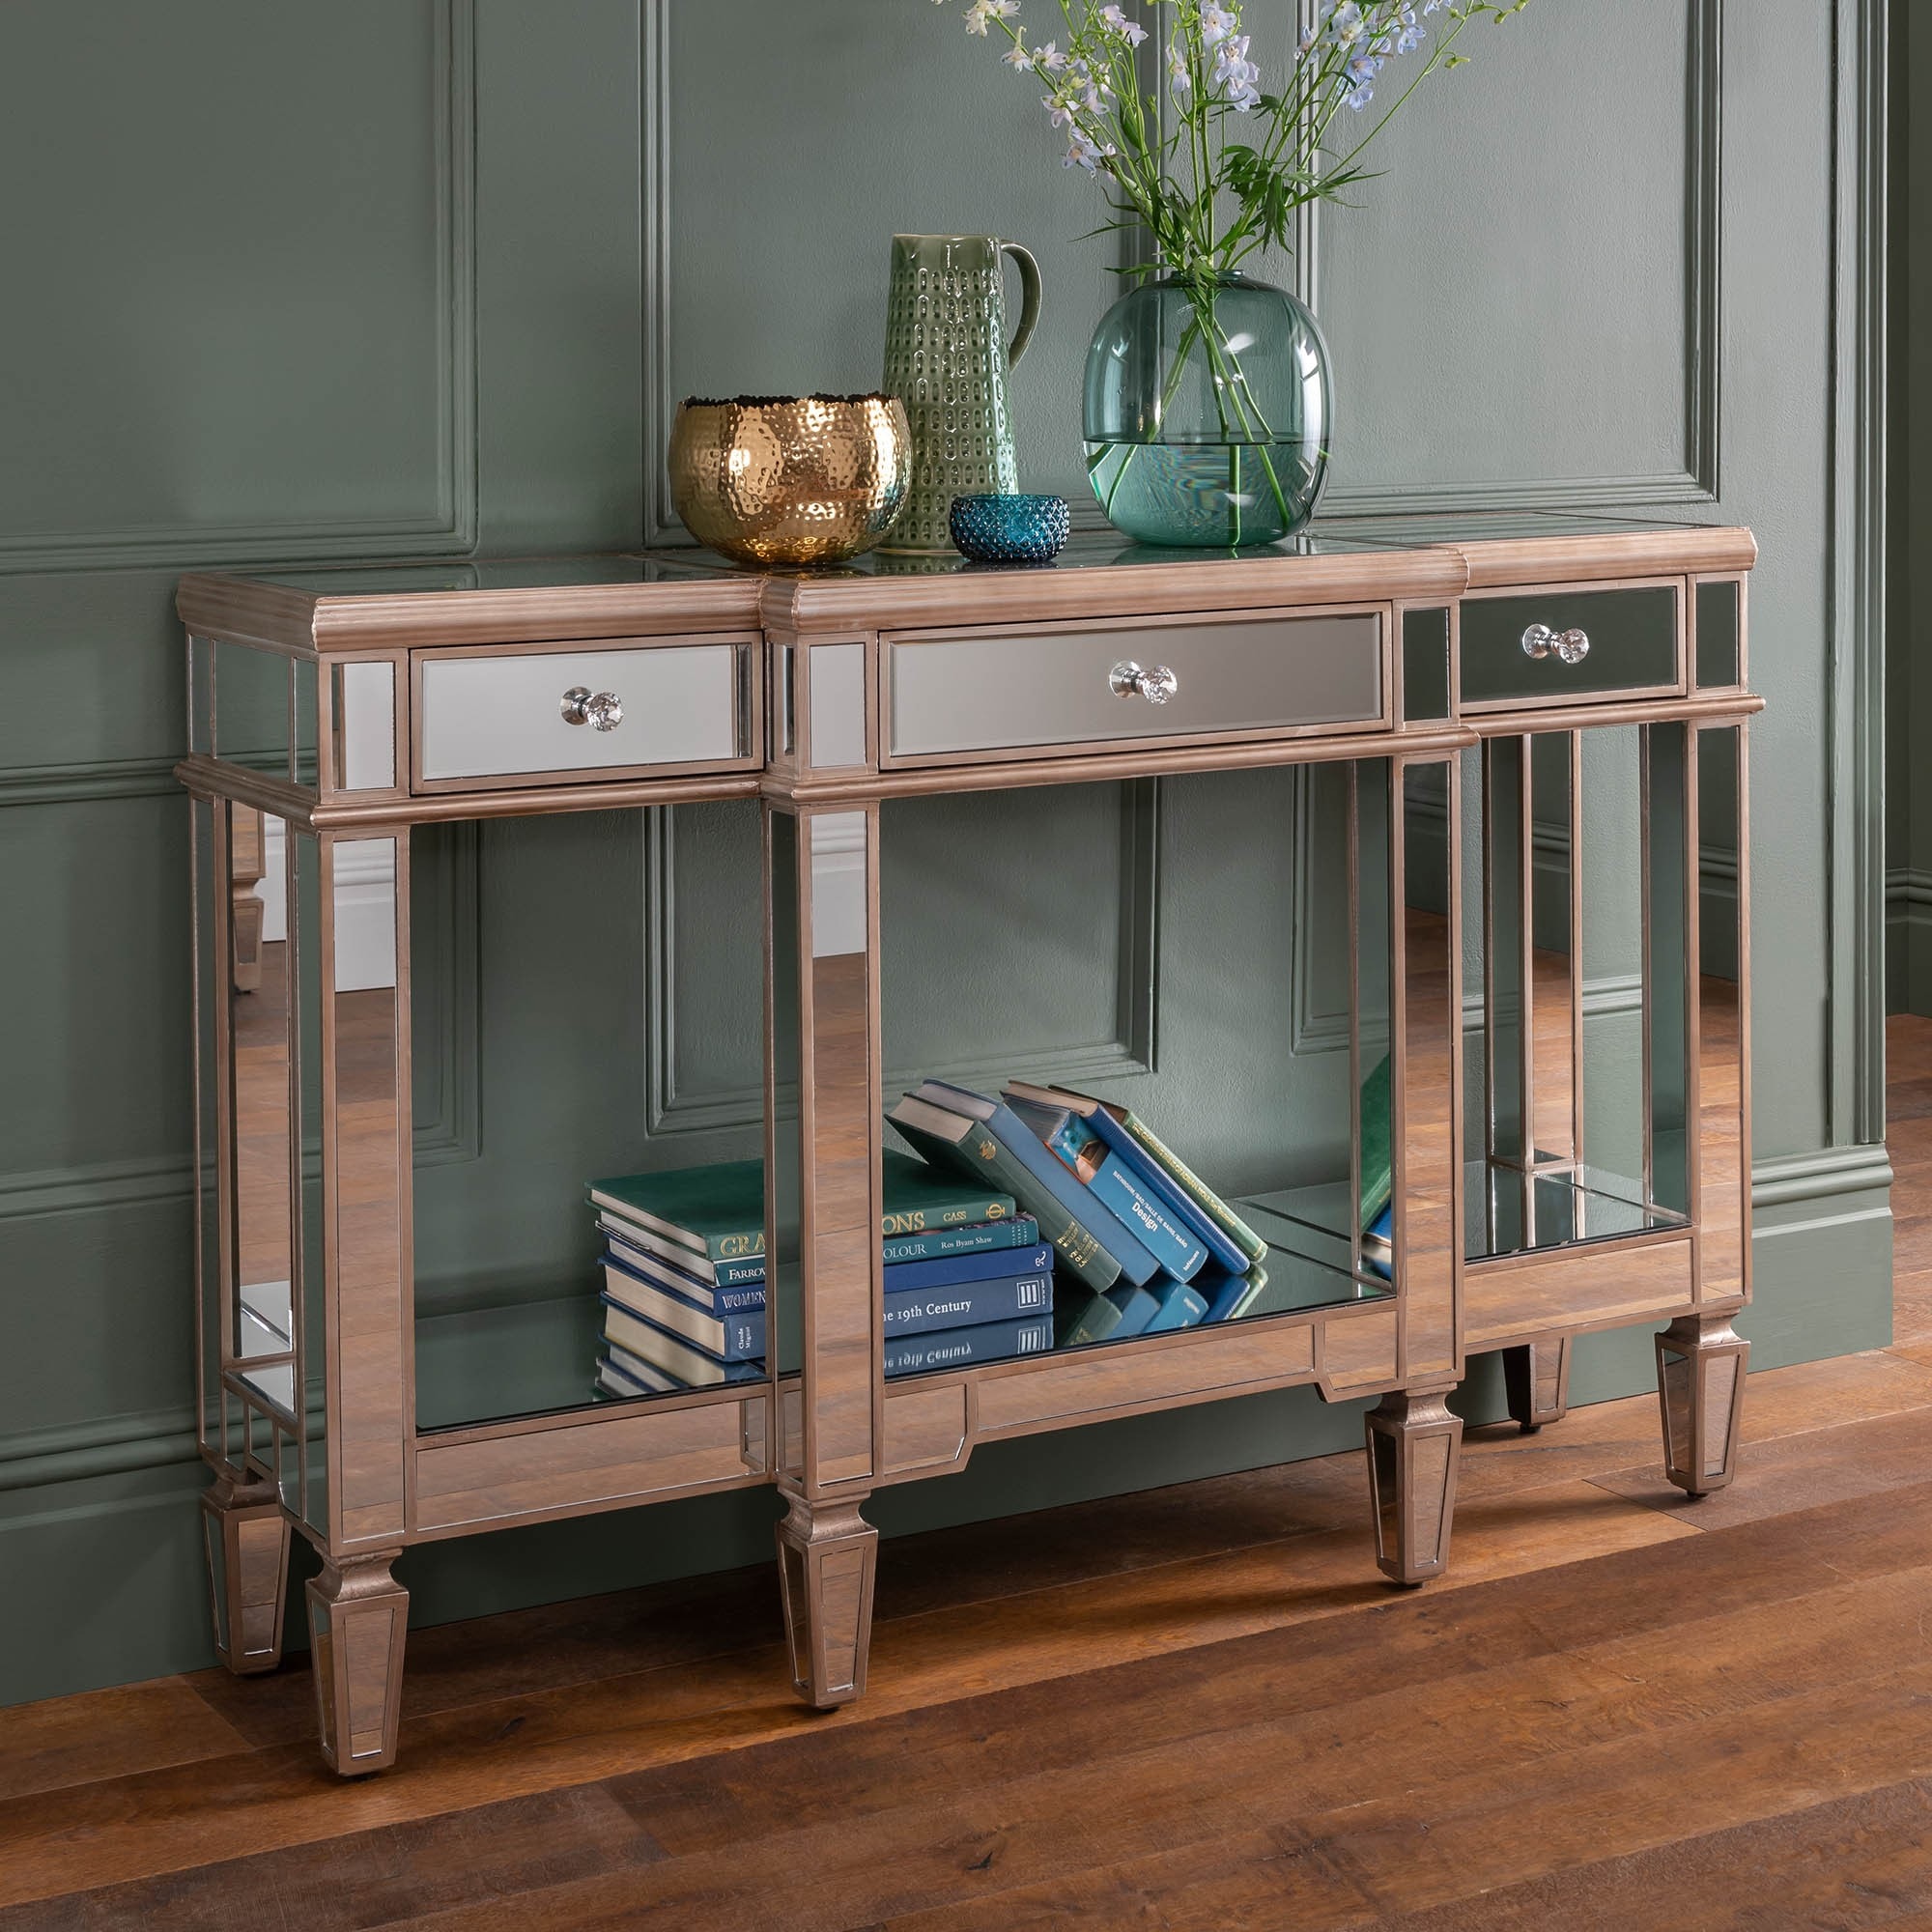 Chic Mirrored Console Tables For Entryways